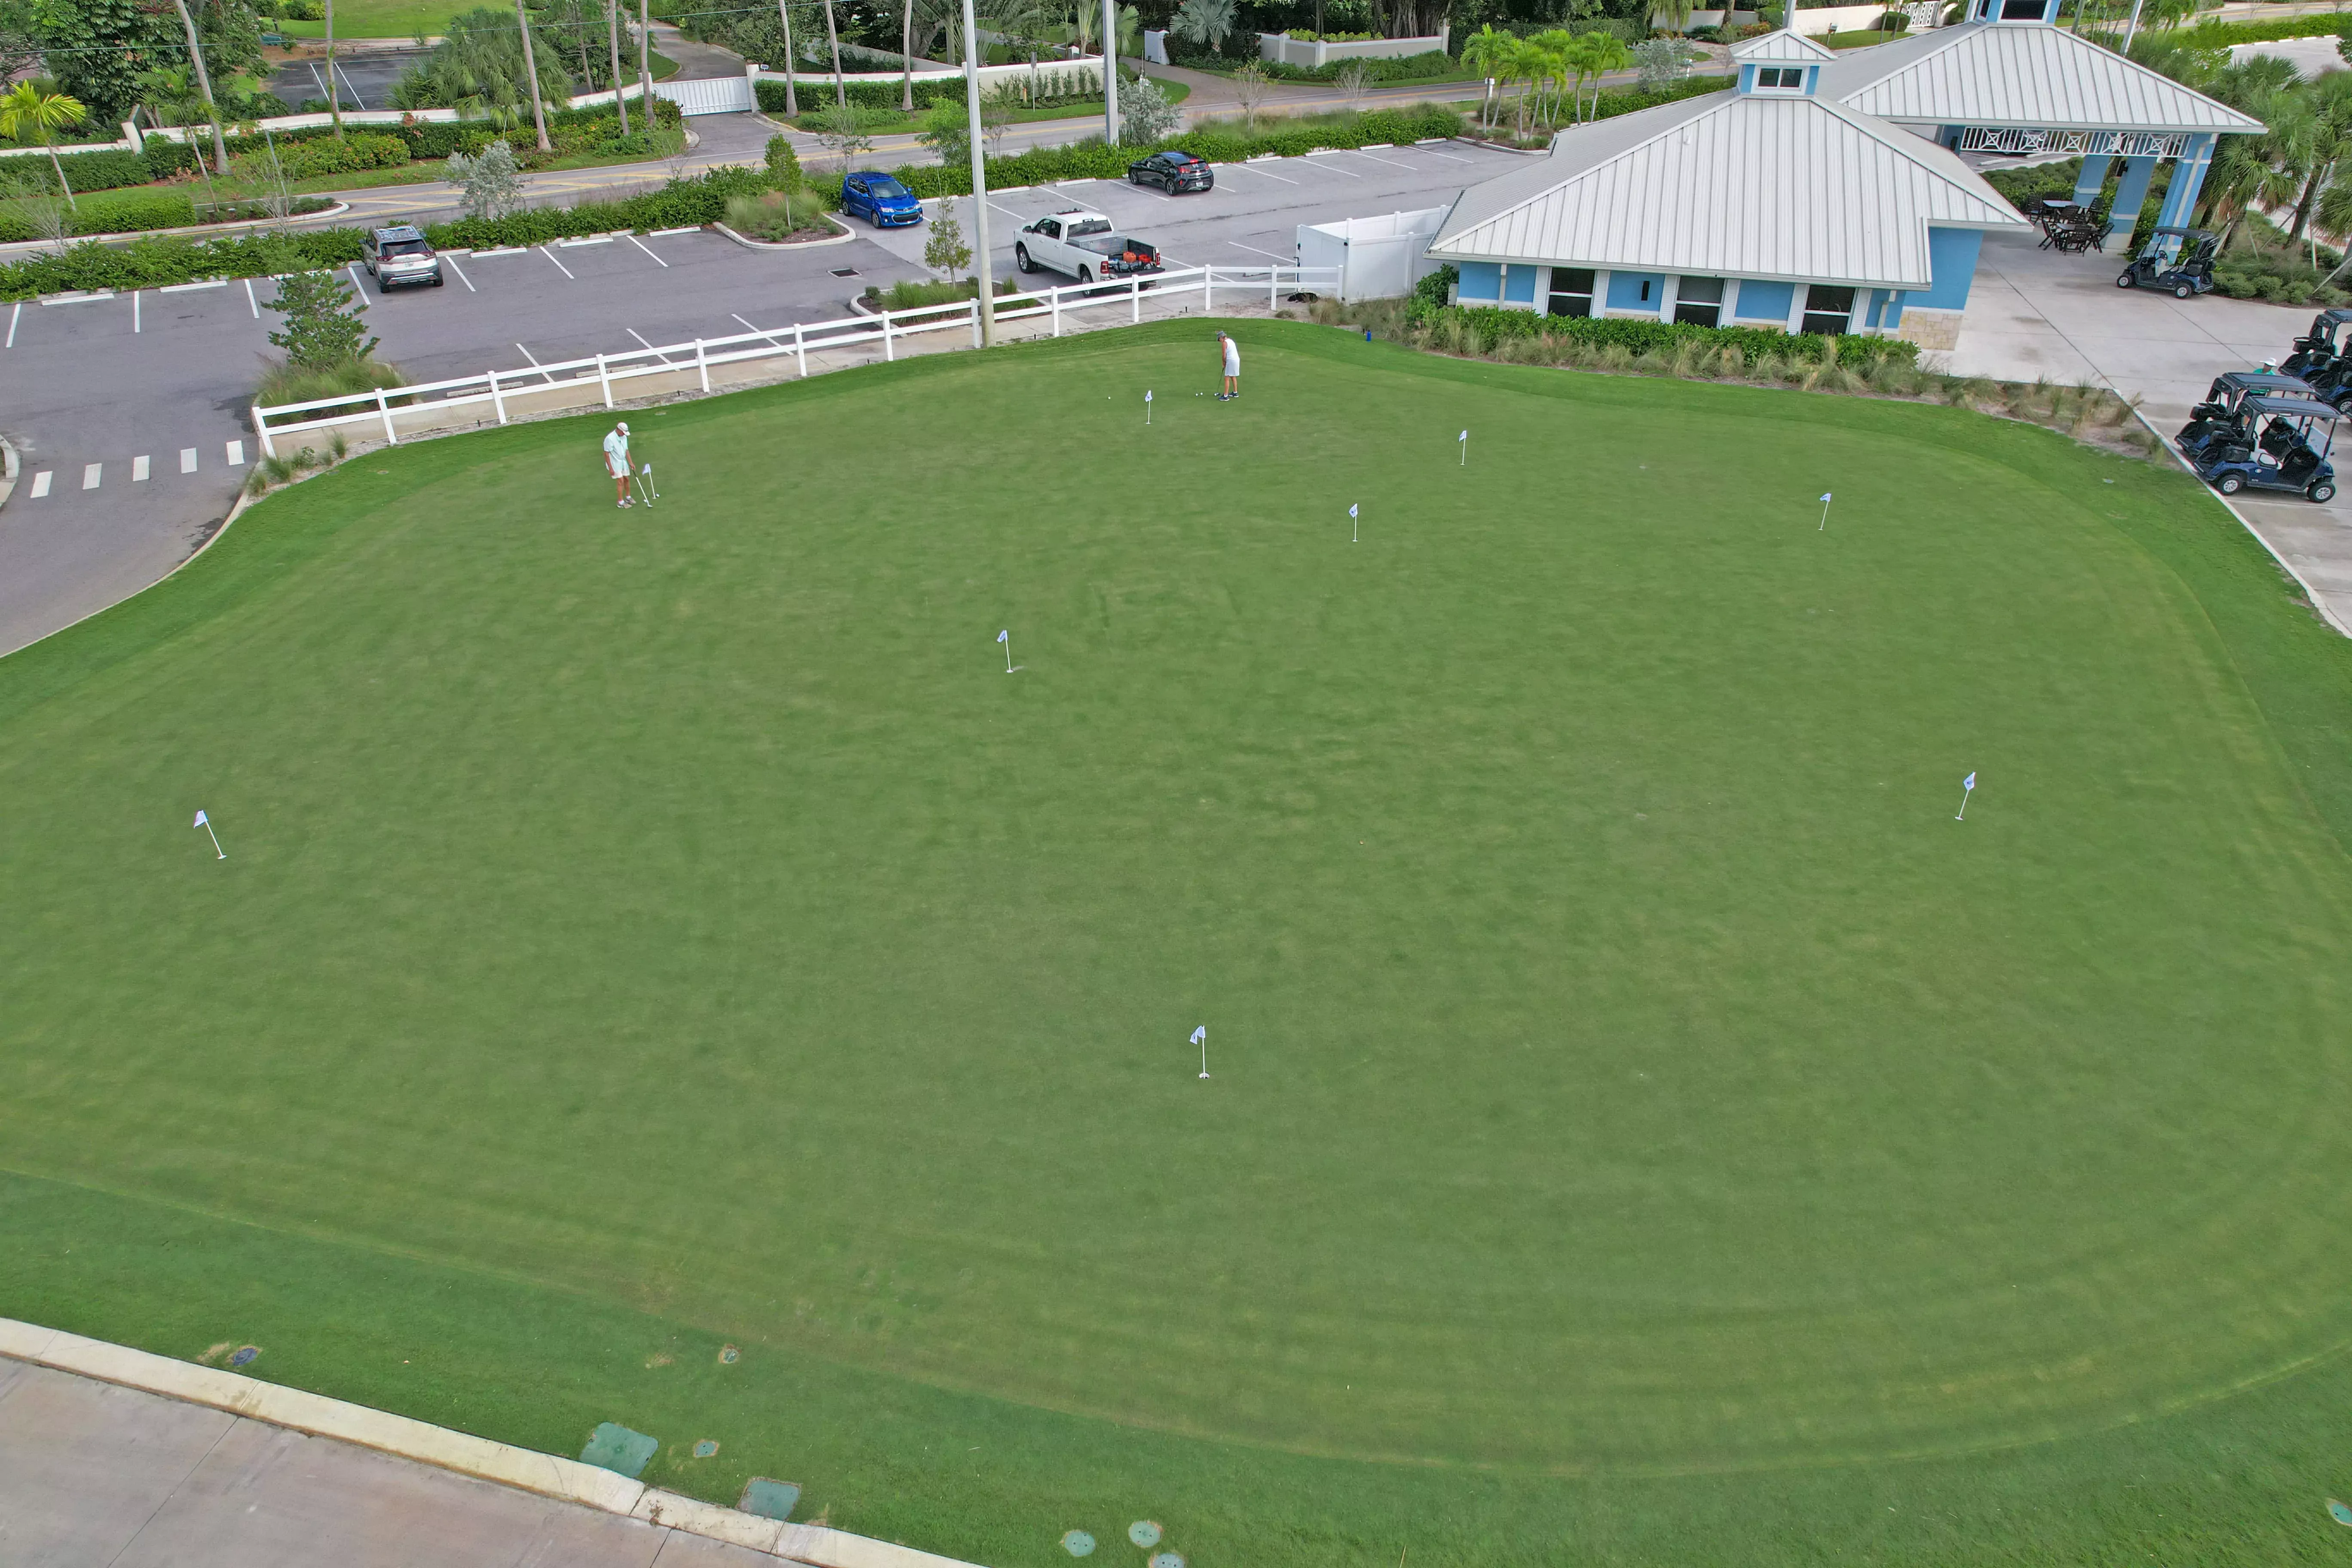 Aerial image of the 10,000 square foot putting green at Sailfish Sands